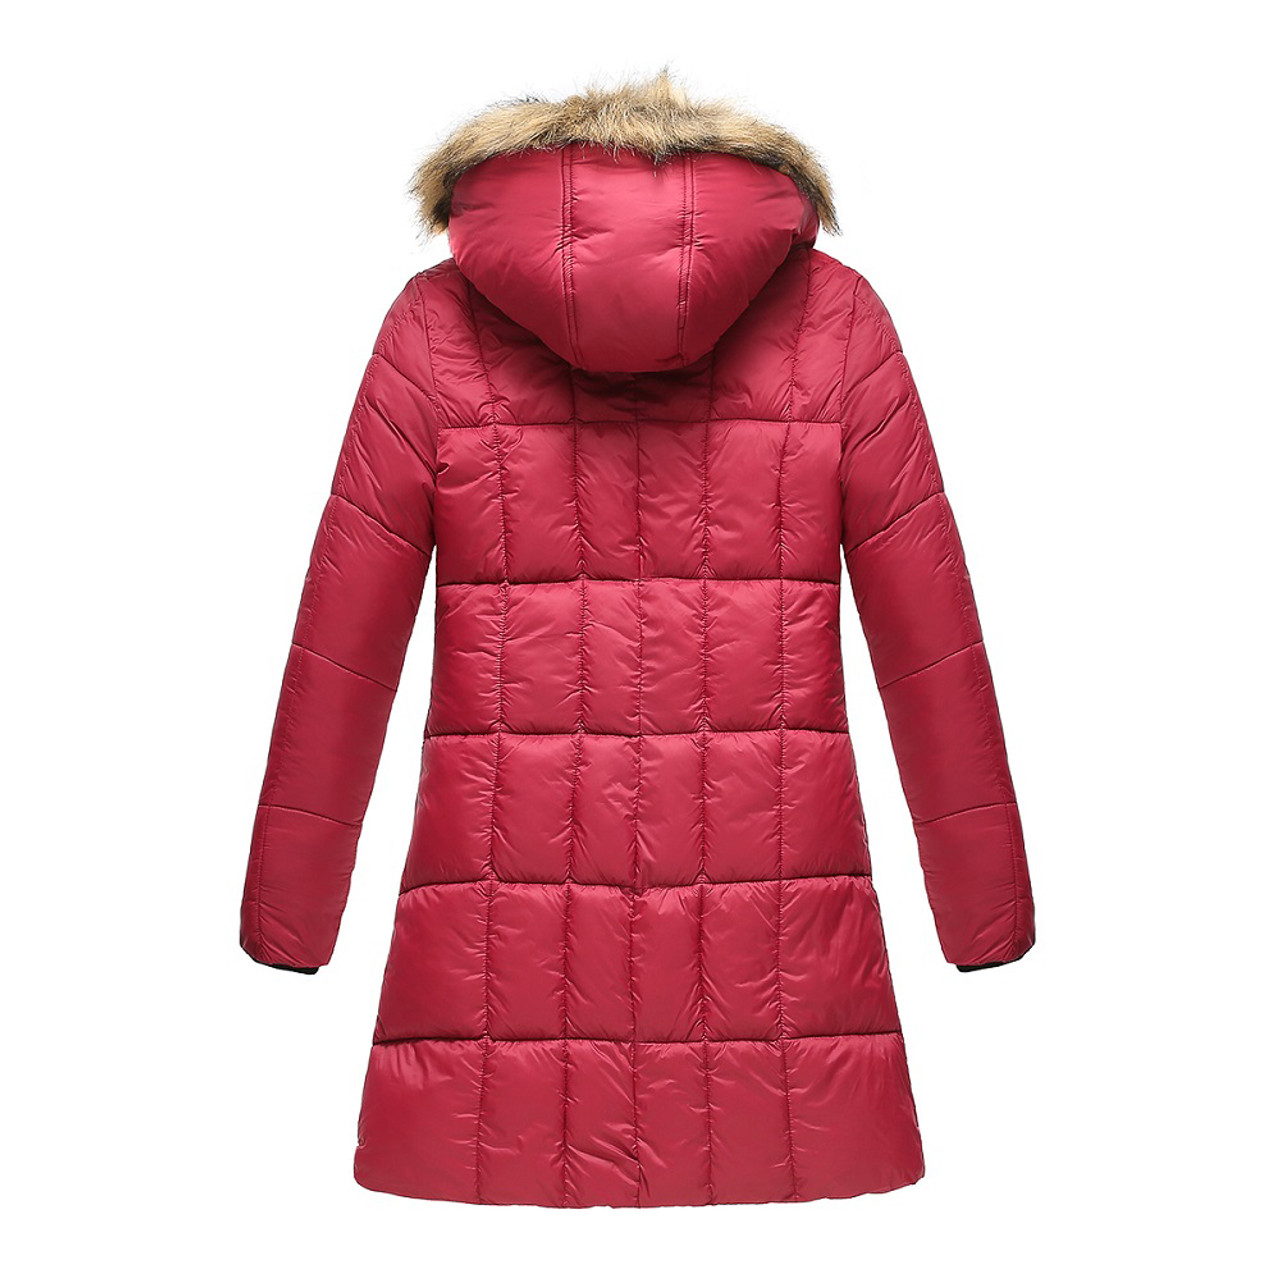 Haute Edition® Women's Mid-Length Puffer Parka Coat with Faux Fur-Lined Hood product image